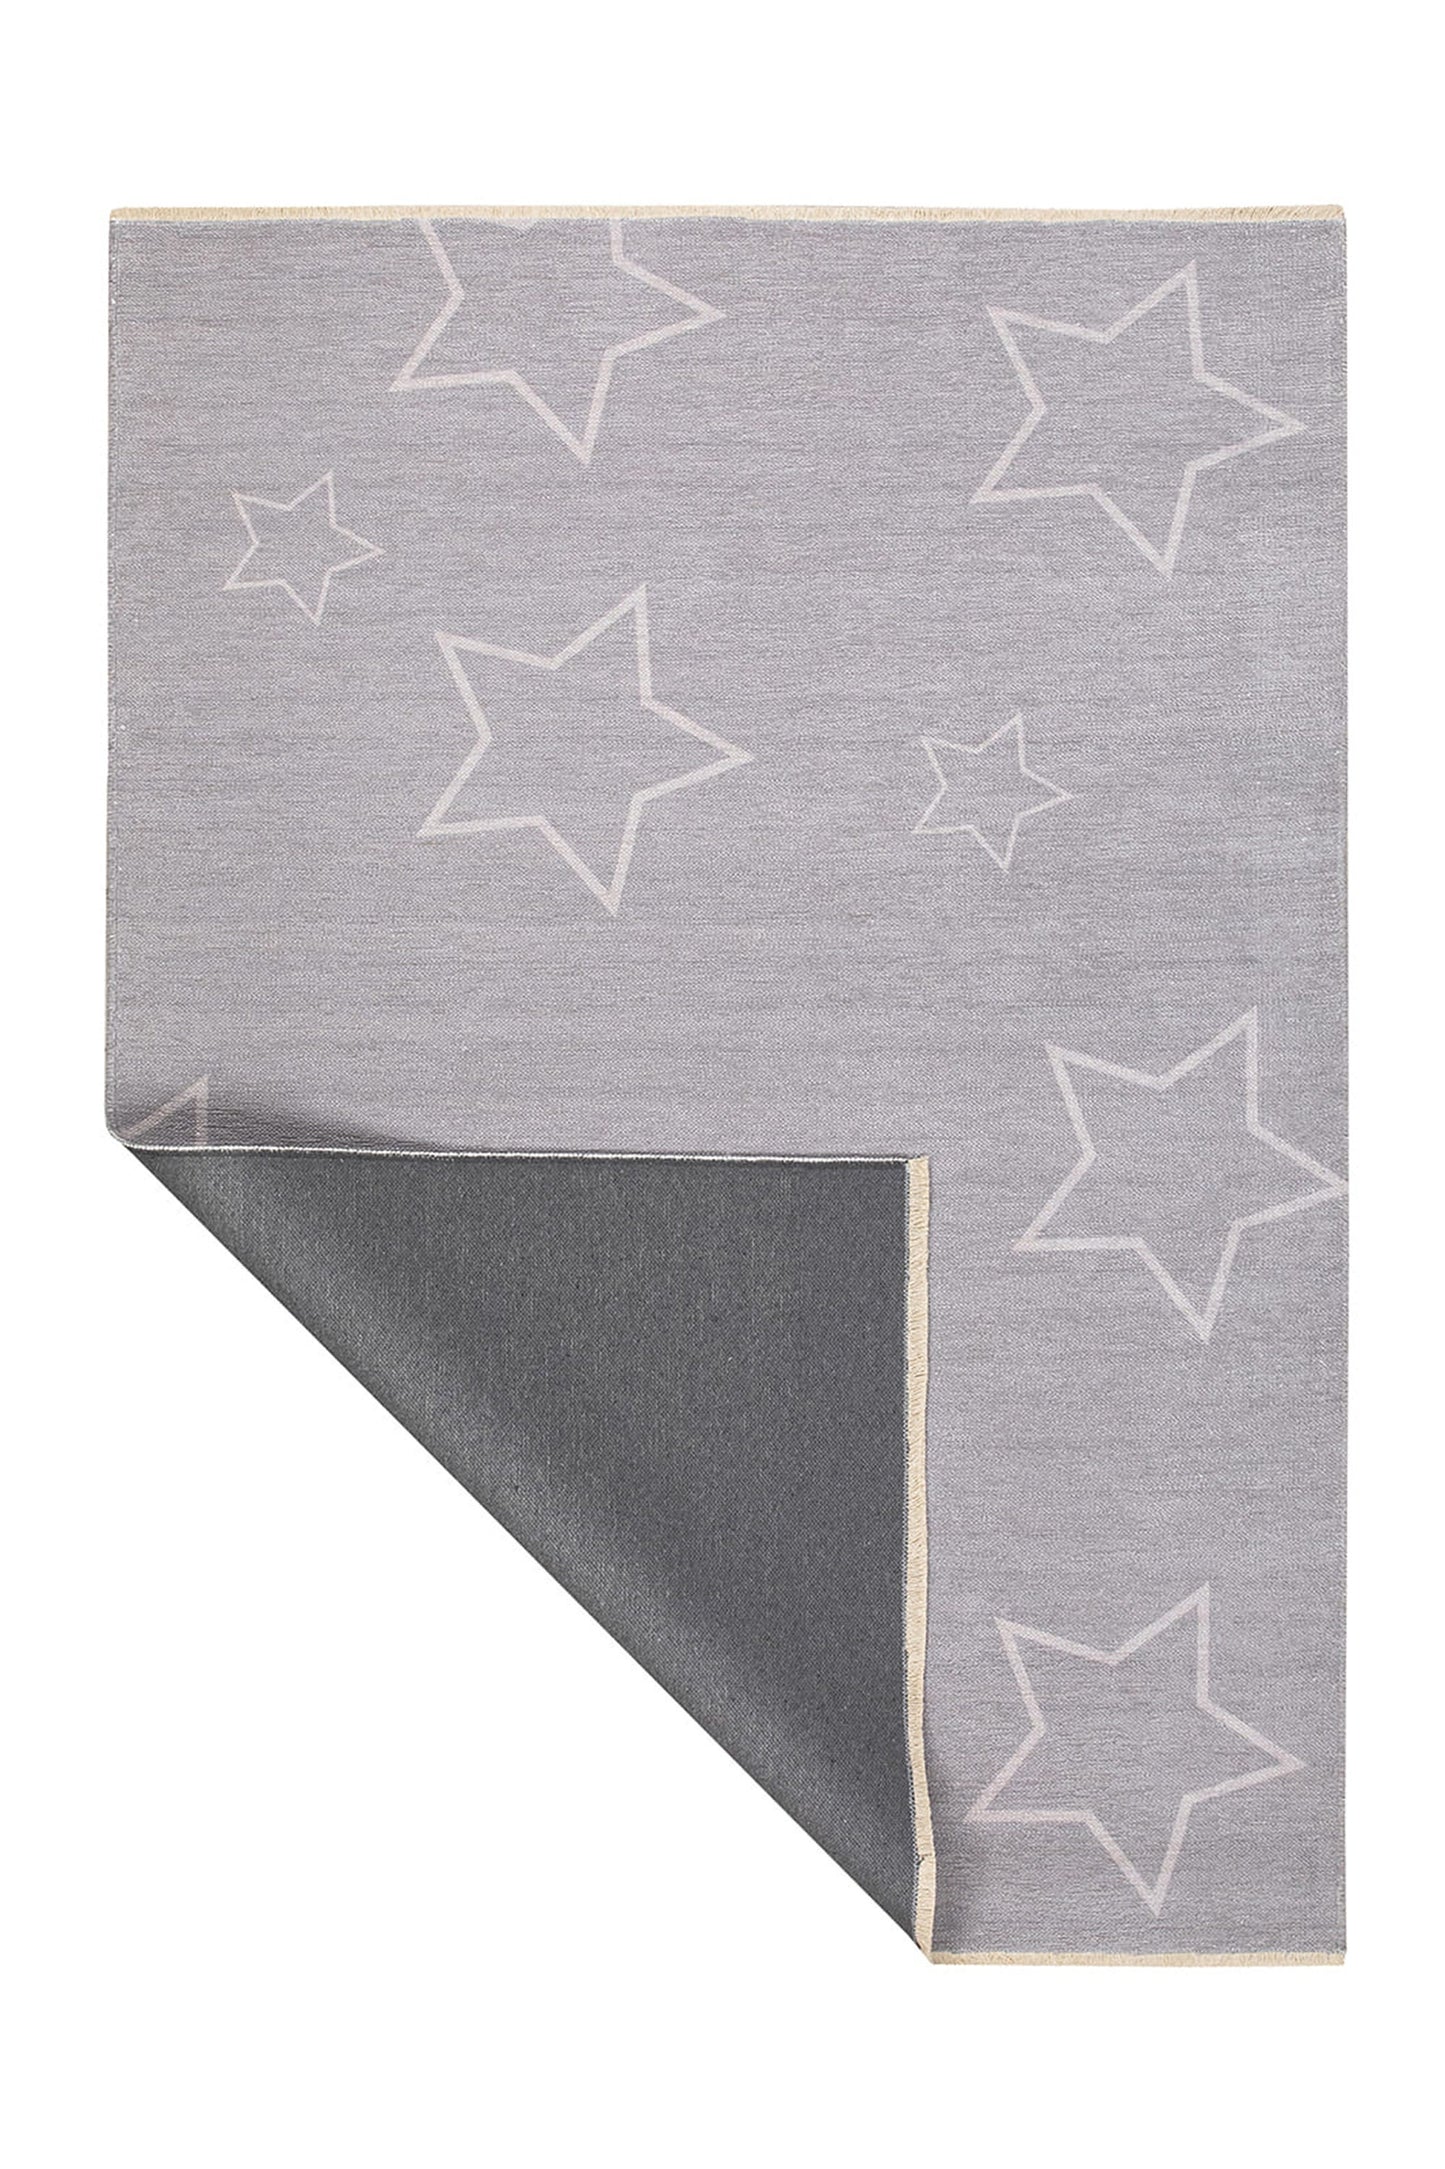 Remi | Star Design Rugs, Turkish Gray rug, Vintage looks, Star, Contemporary Design, Home decor, Modern Area Rugs For Living Room Bedroom